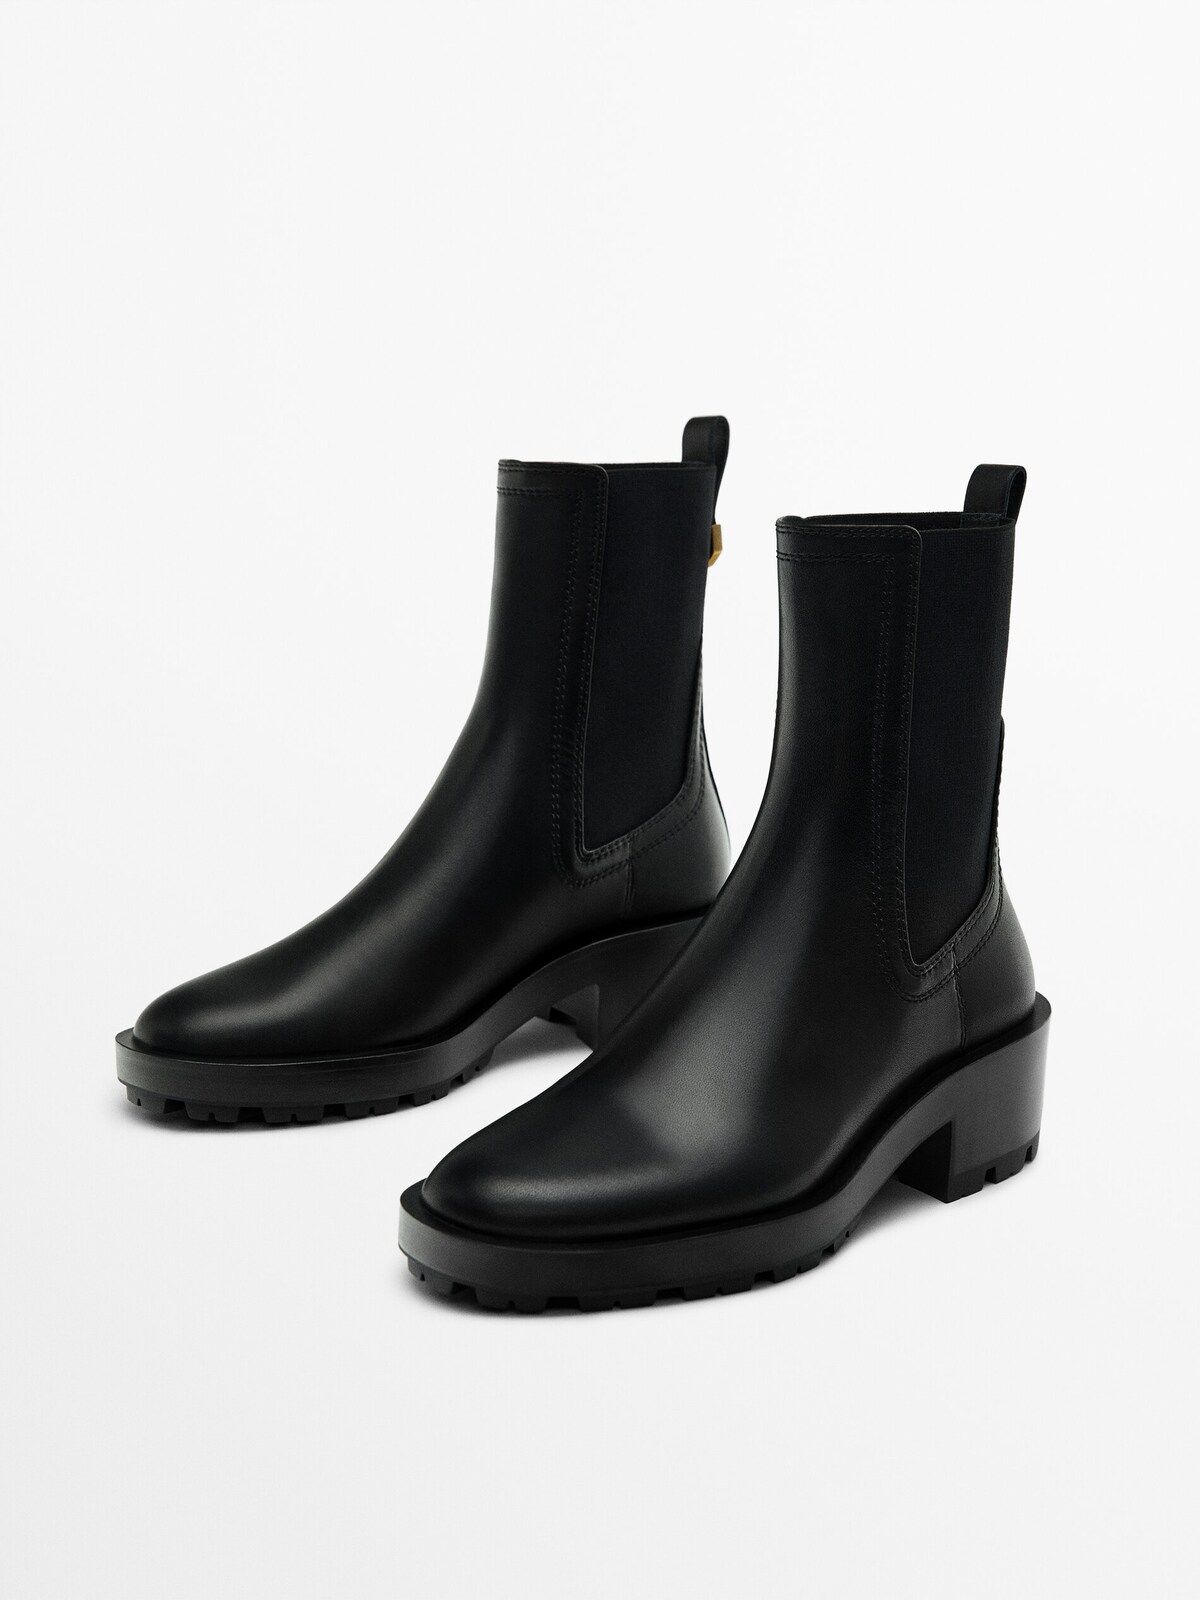 Chelsea boots with track soles | Massimo Dutti UK